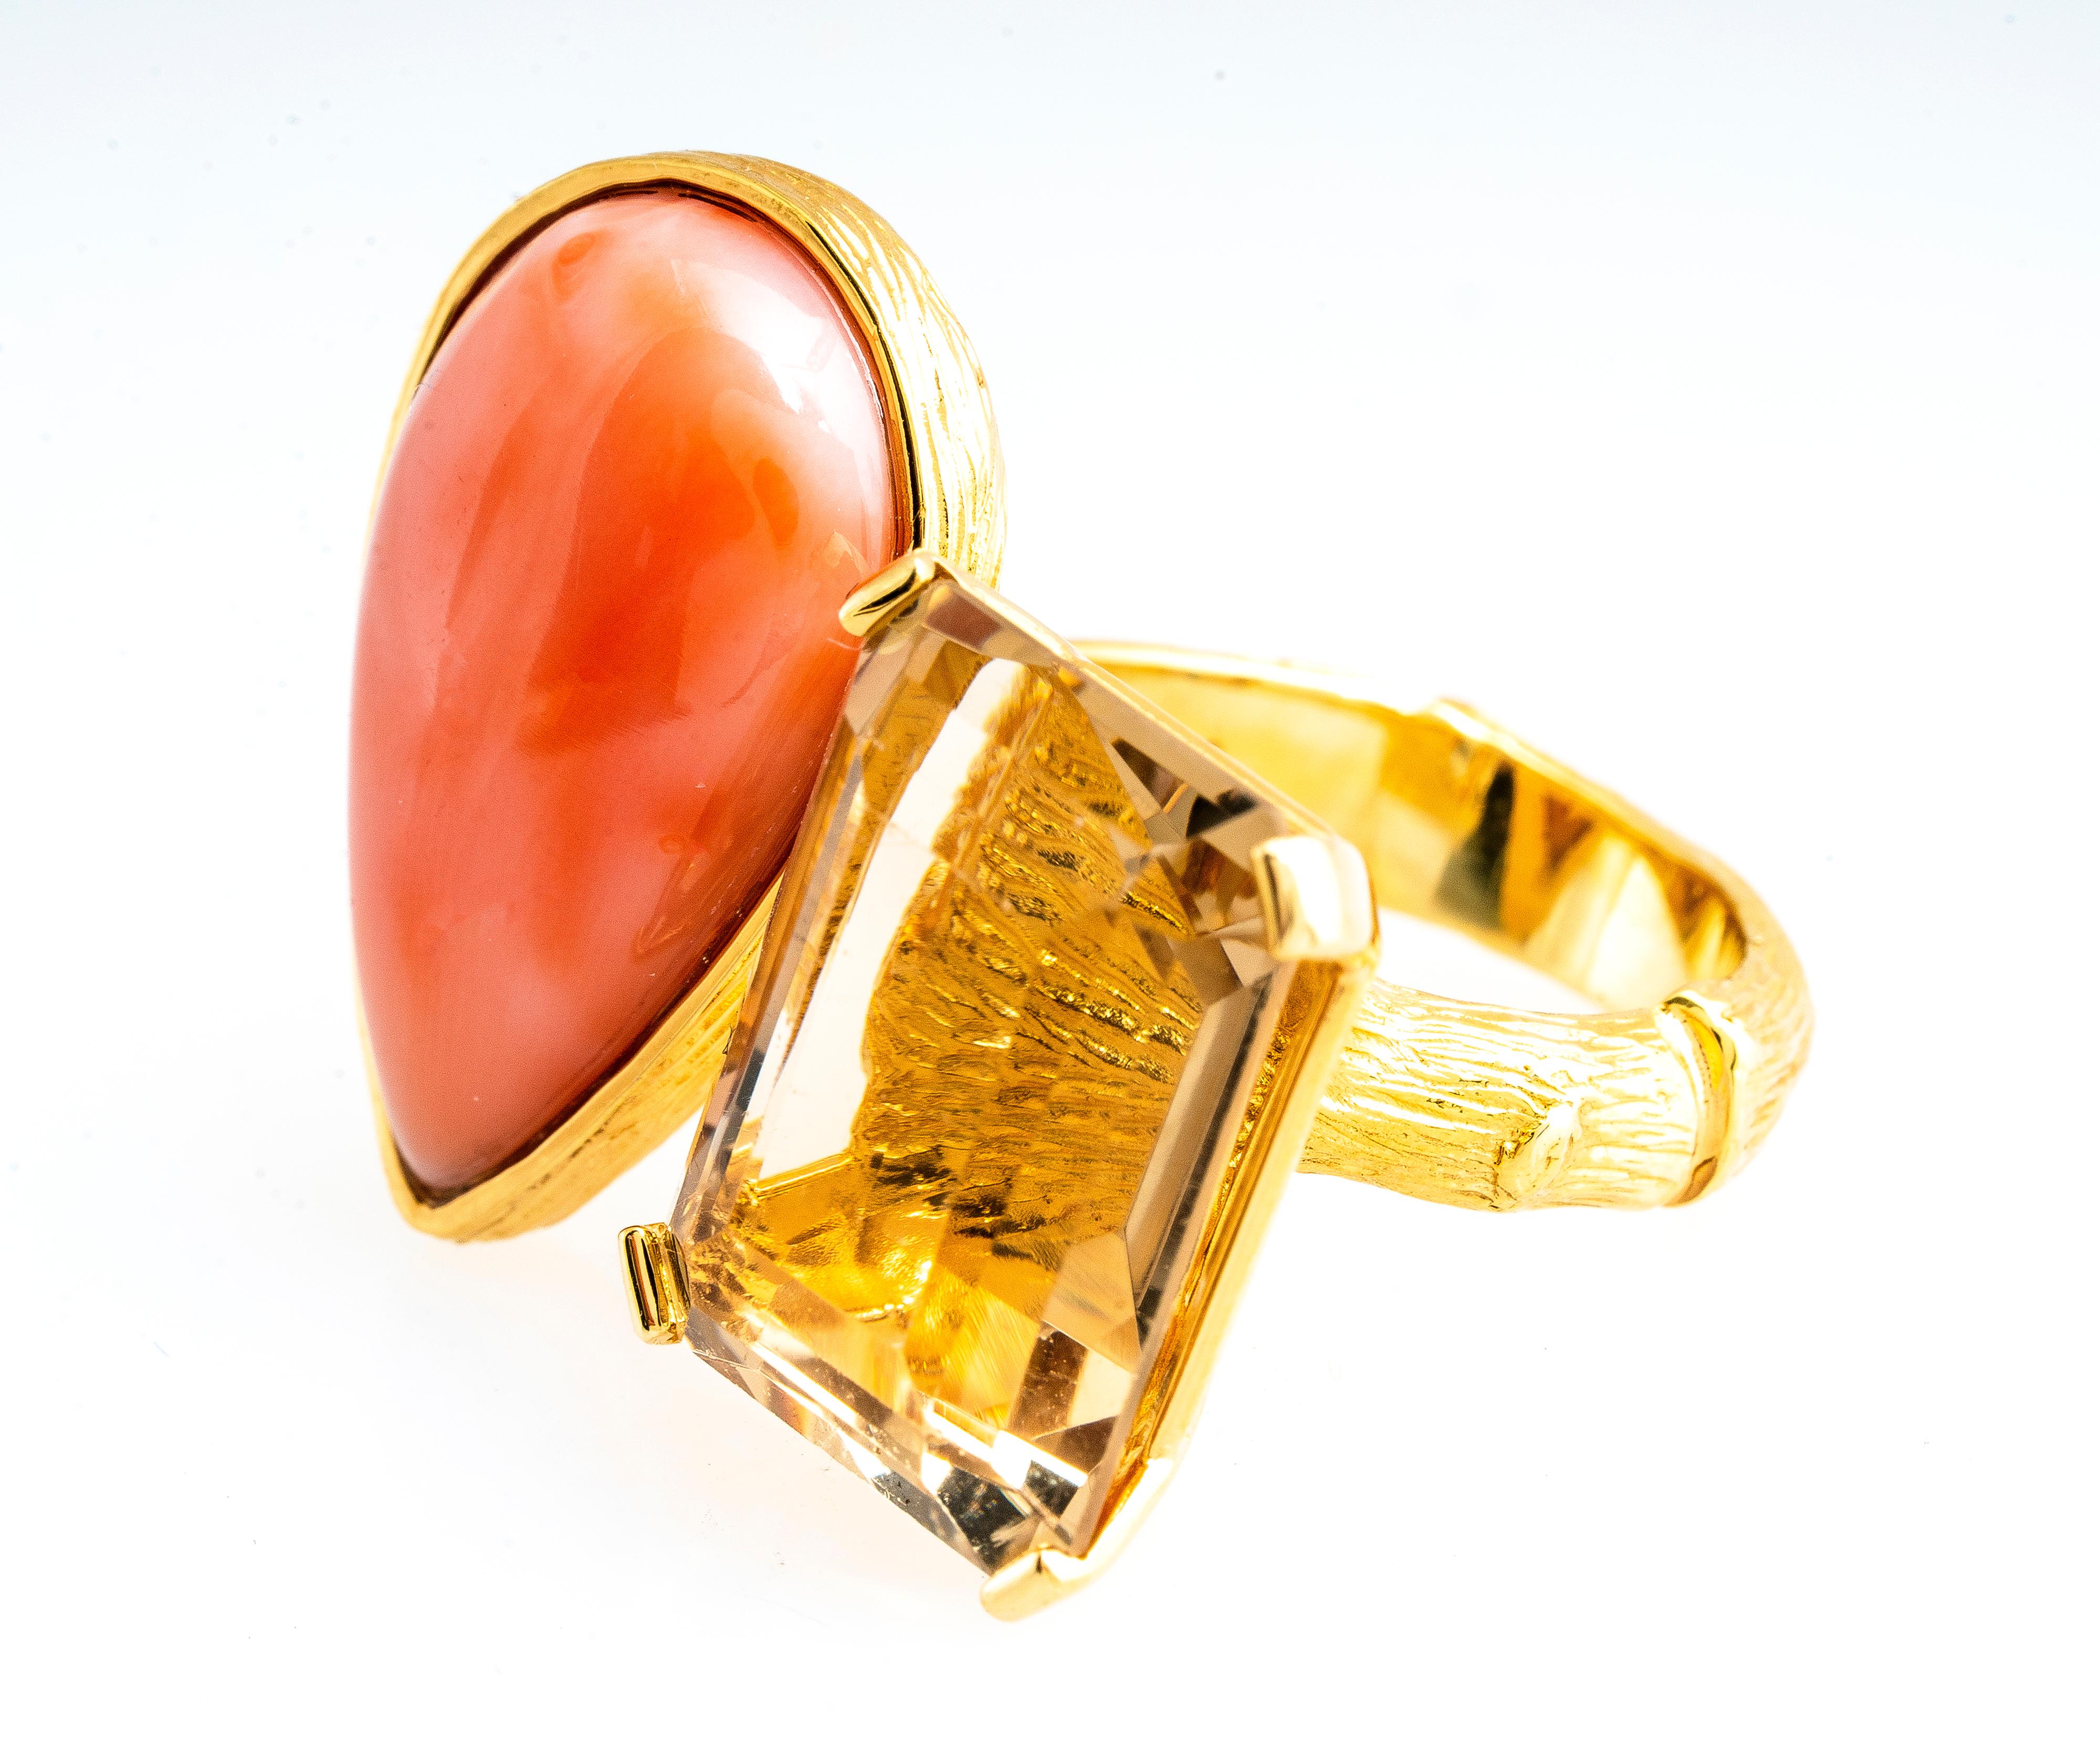 Vintage 18k yellow gold pink Coral and quartz twig ring by K. Brunini Jewels.  Pear shaped coral measures 22.5mm x 14mm.  The emerald shaped quartz measures 17.5mm x 13.4mm.  The ring shank is bamboo or twig shaped and the bezel around the coral has